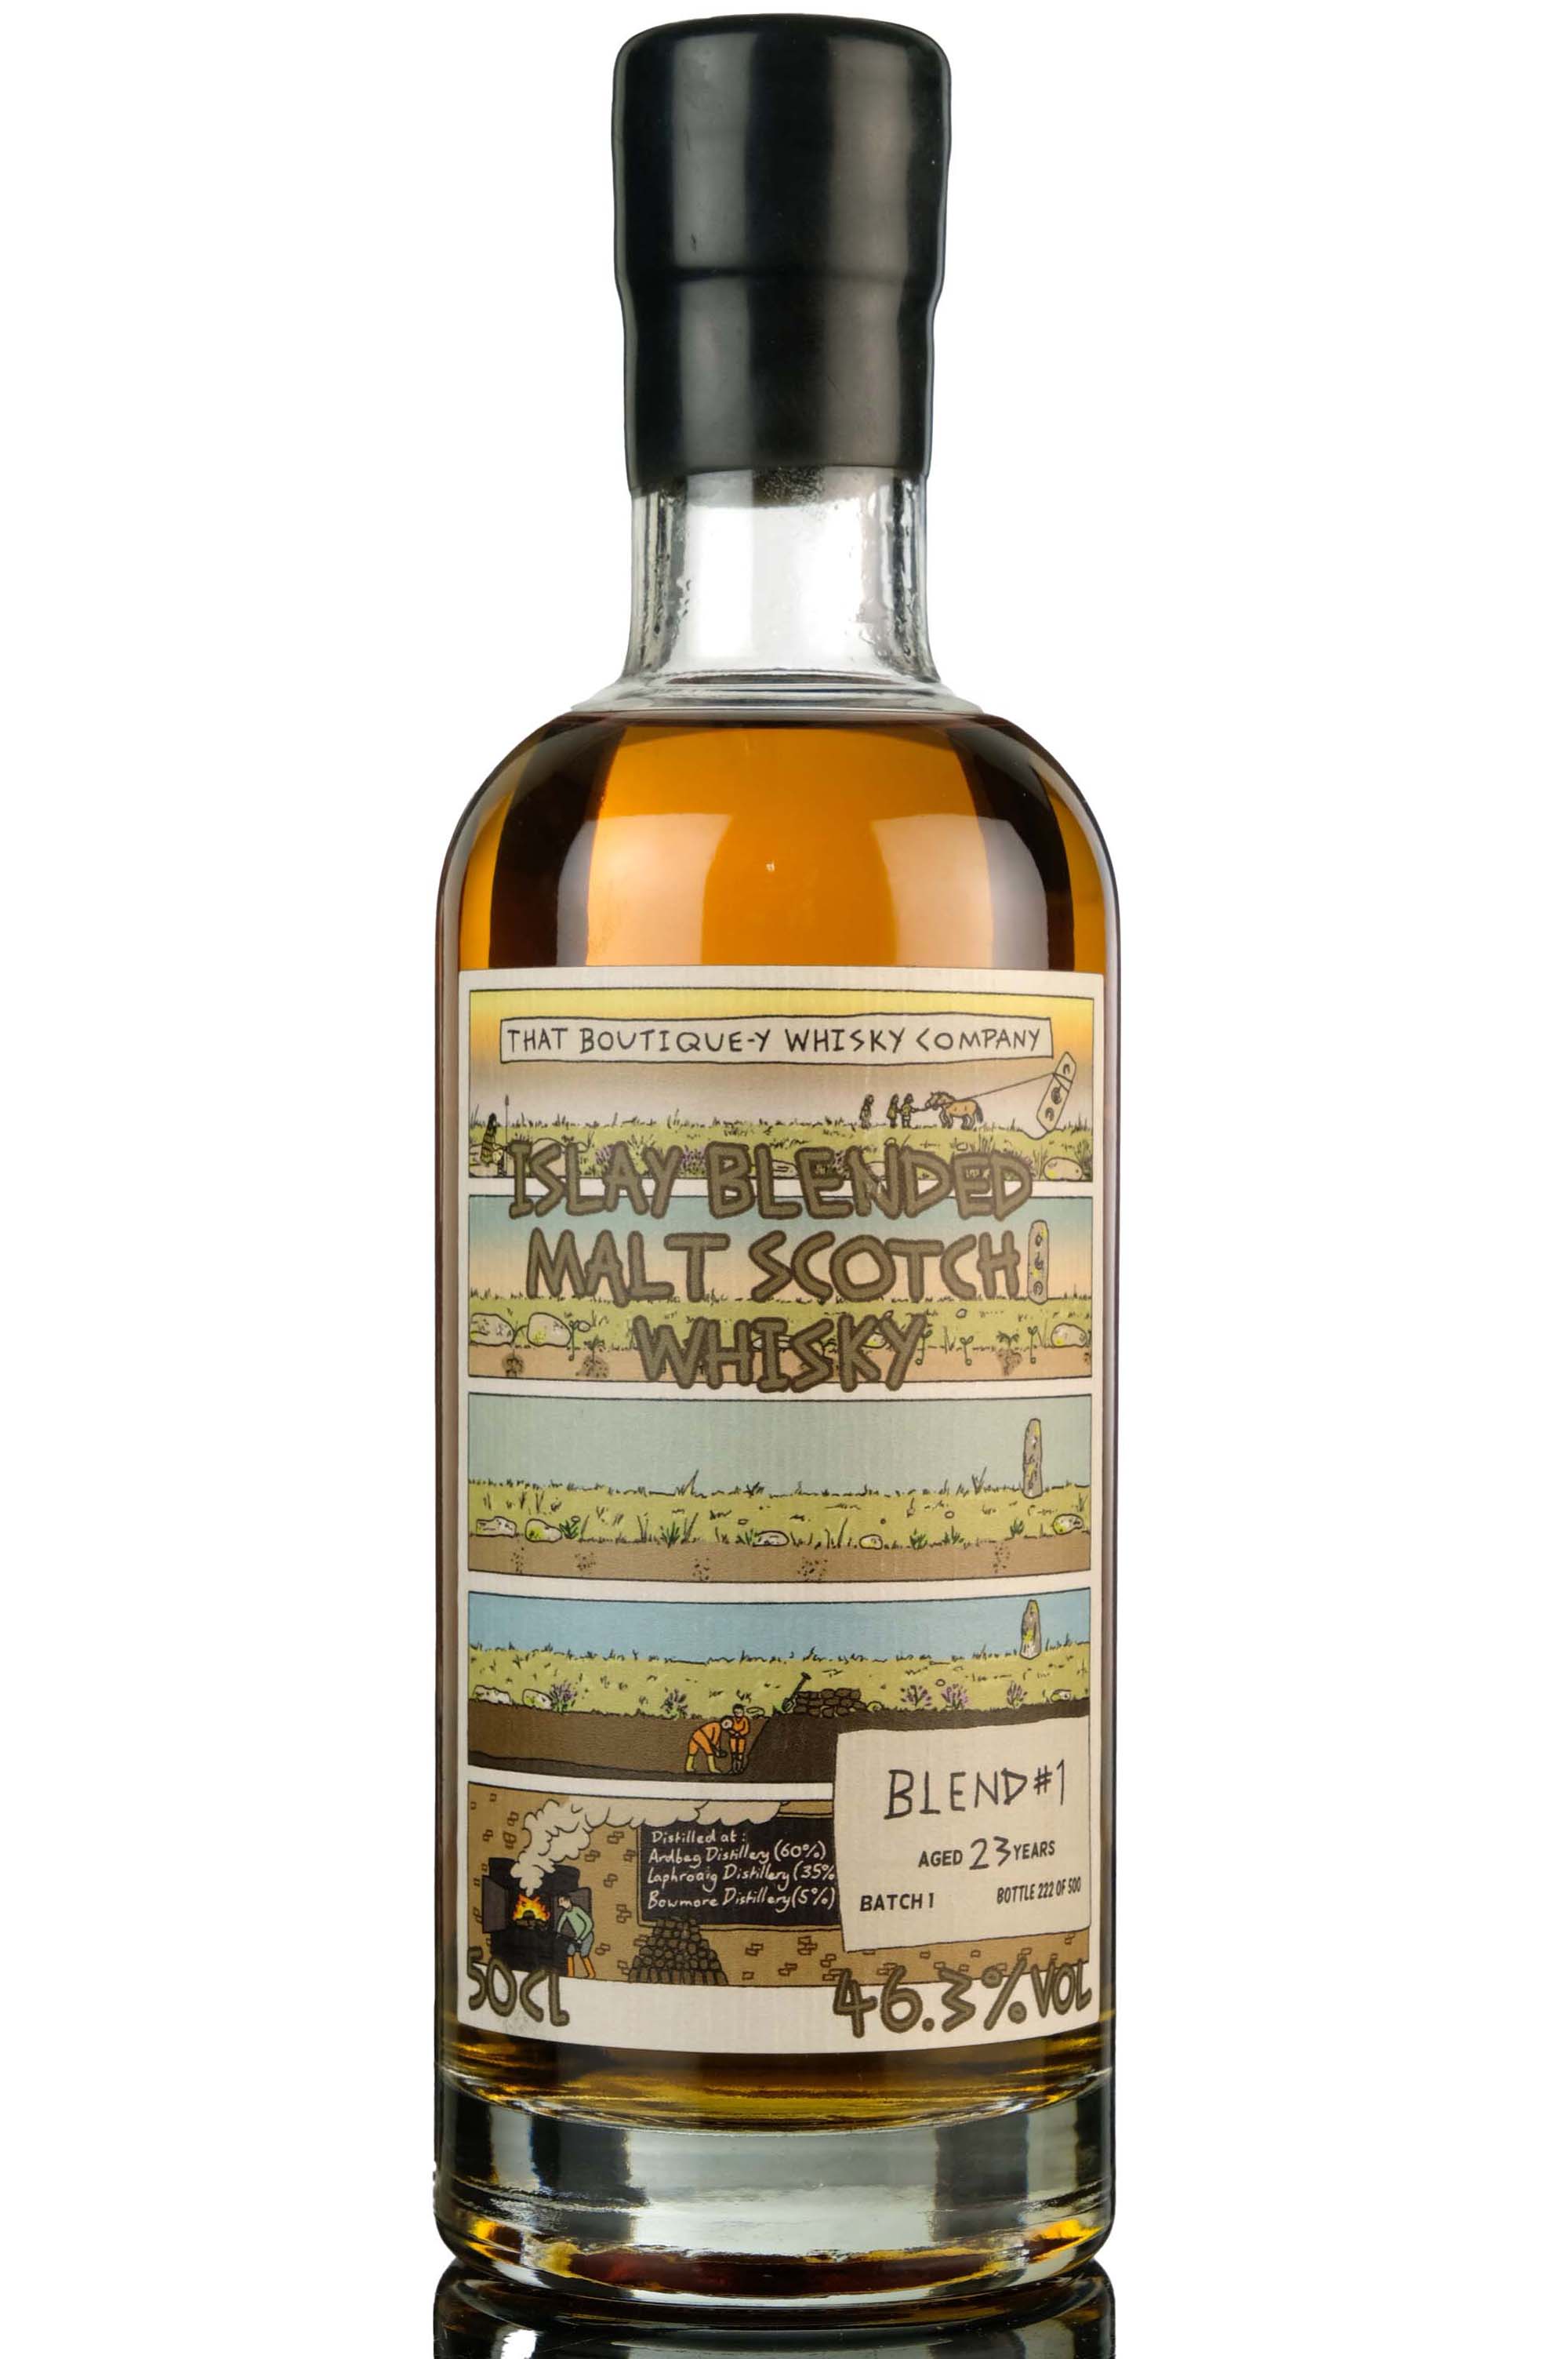 Islay Blended Malt 23 Year Old - That Boutique-y Whisky Company - Batch 1 - 2016 Release